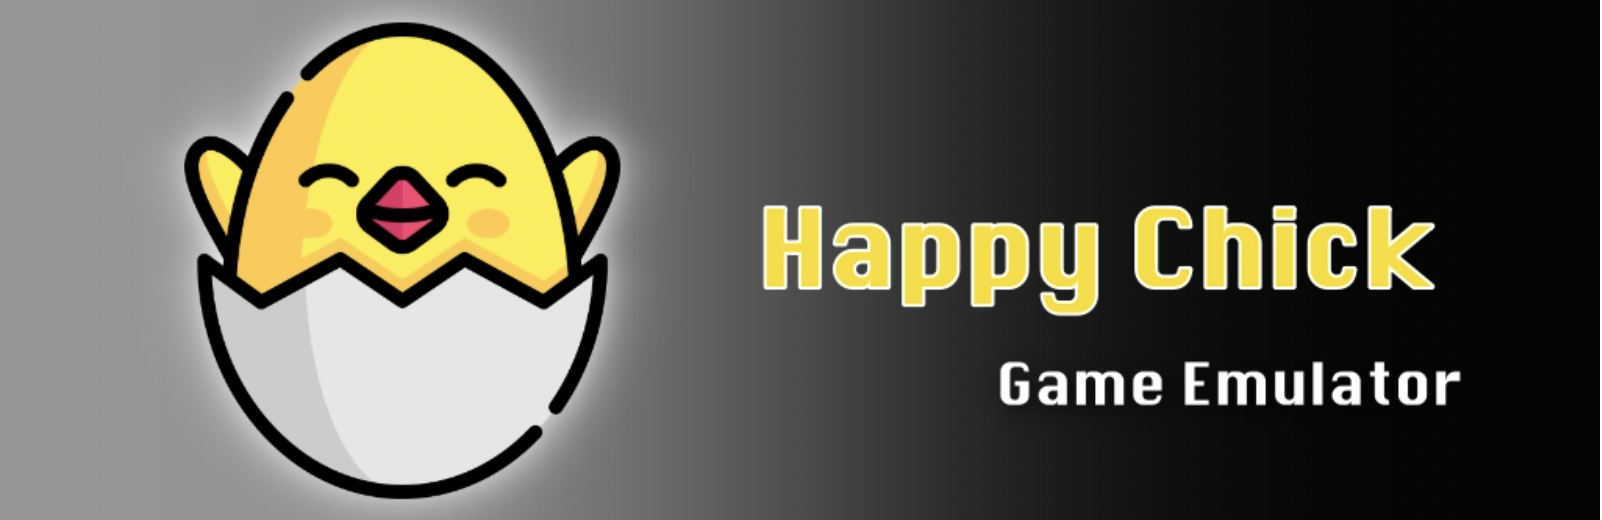 Happy Chick Emulator Free Download on iPhone